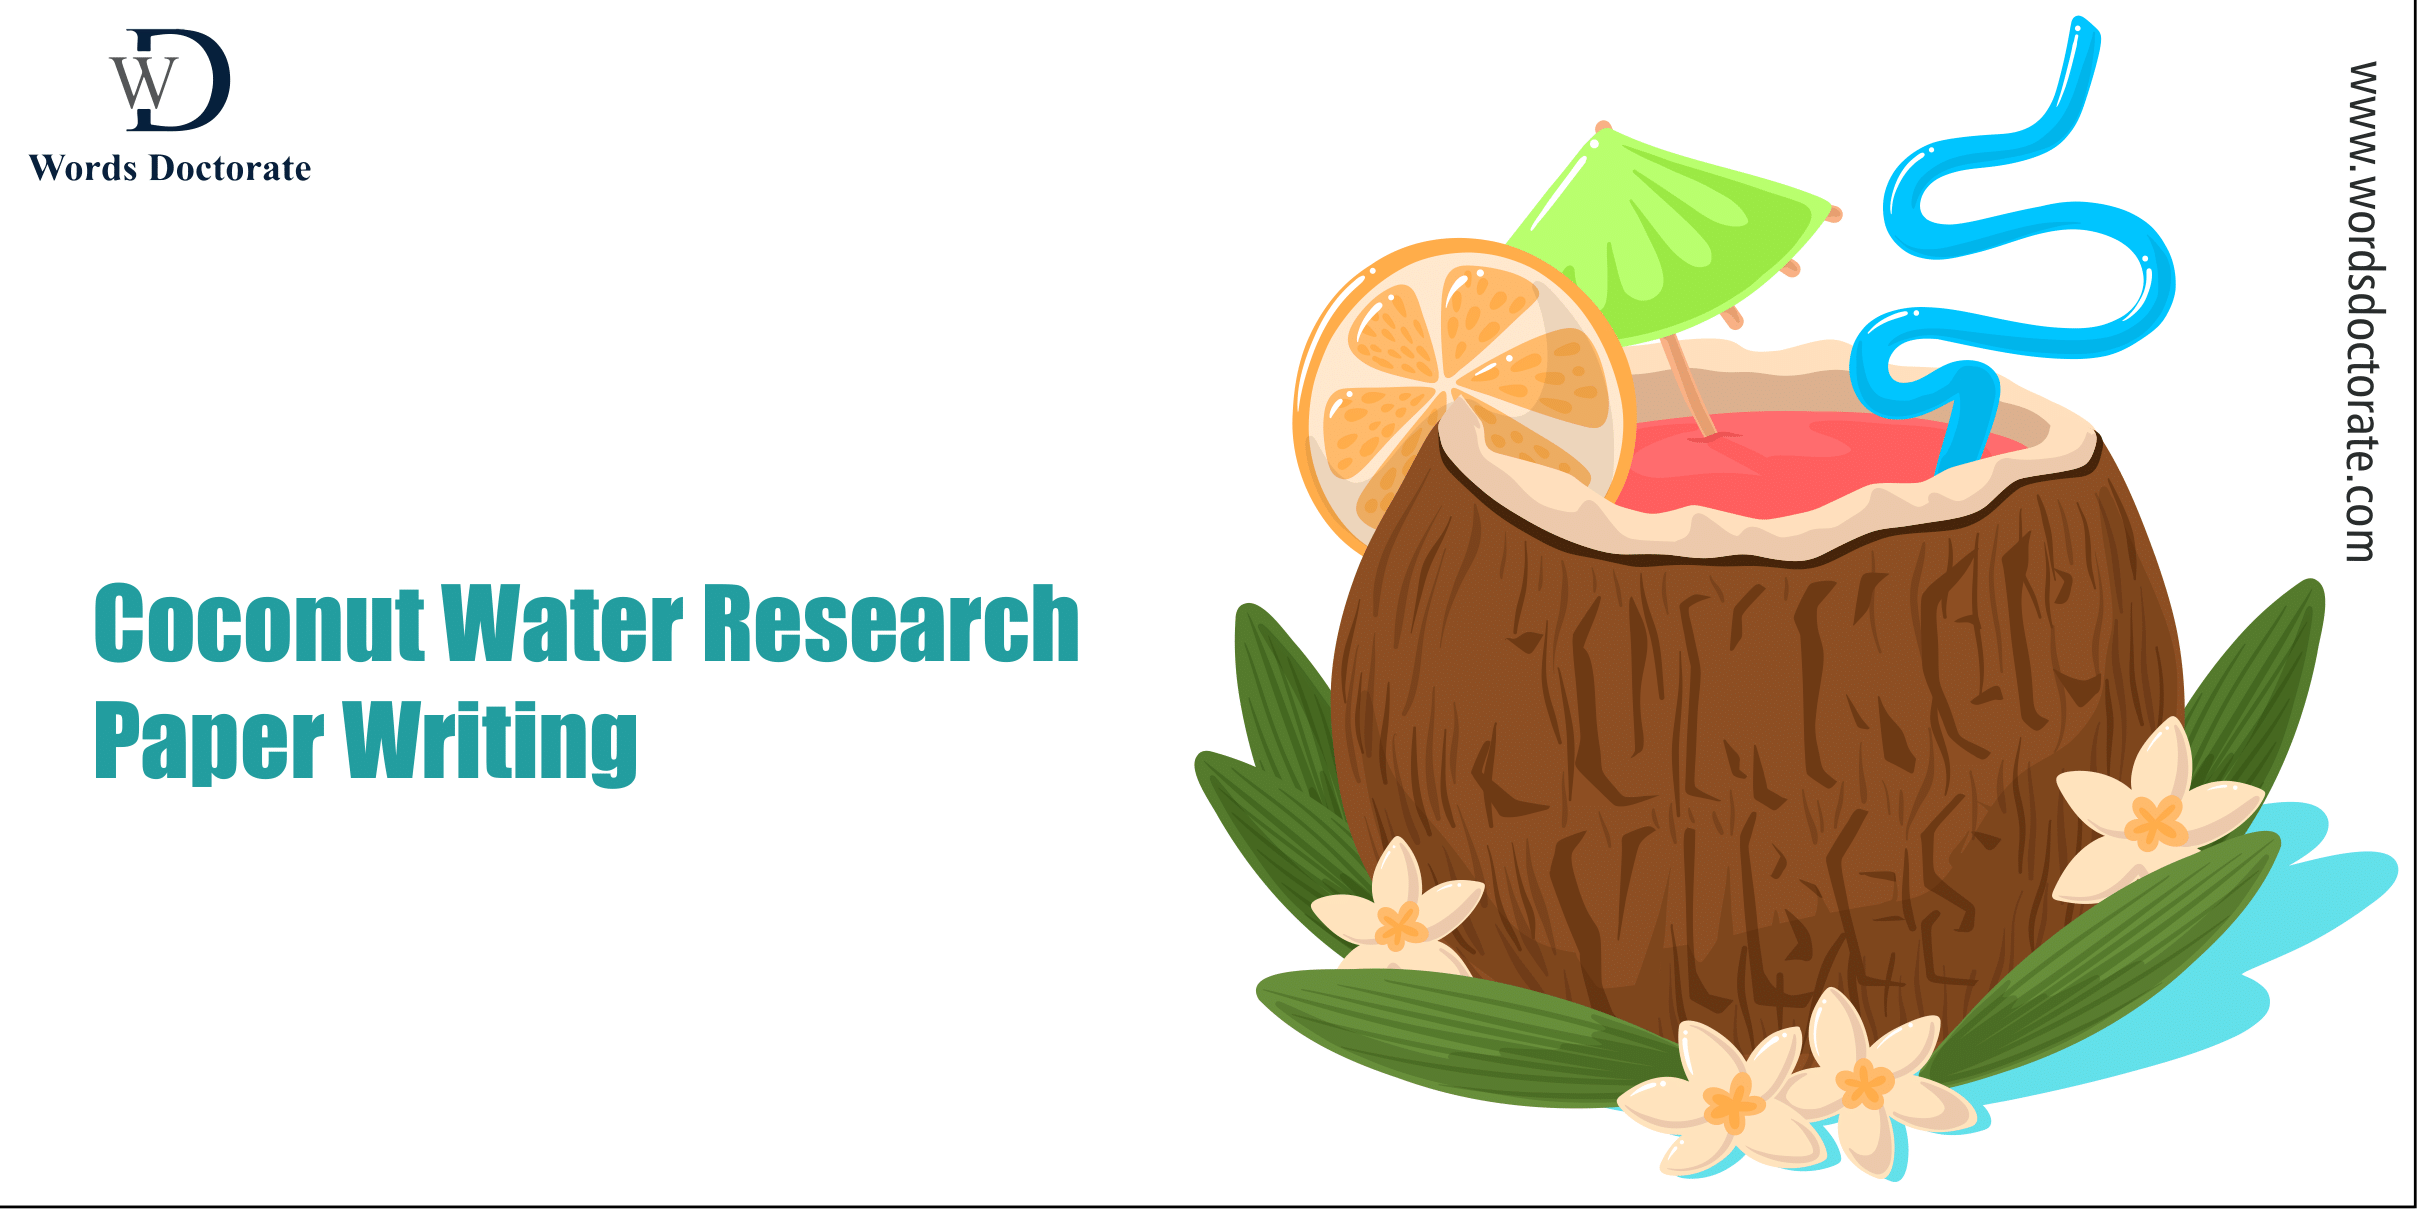 Coconut Water Research Paper Writing